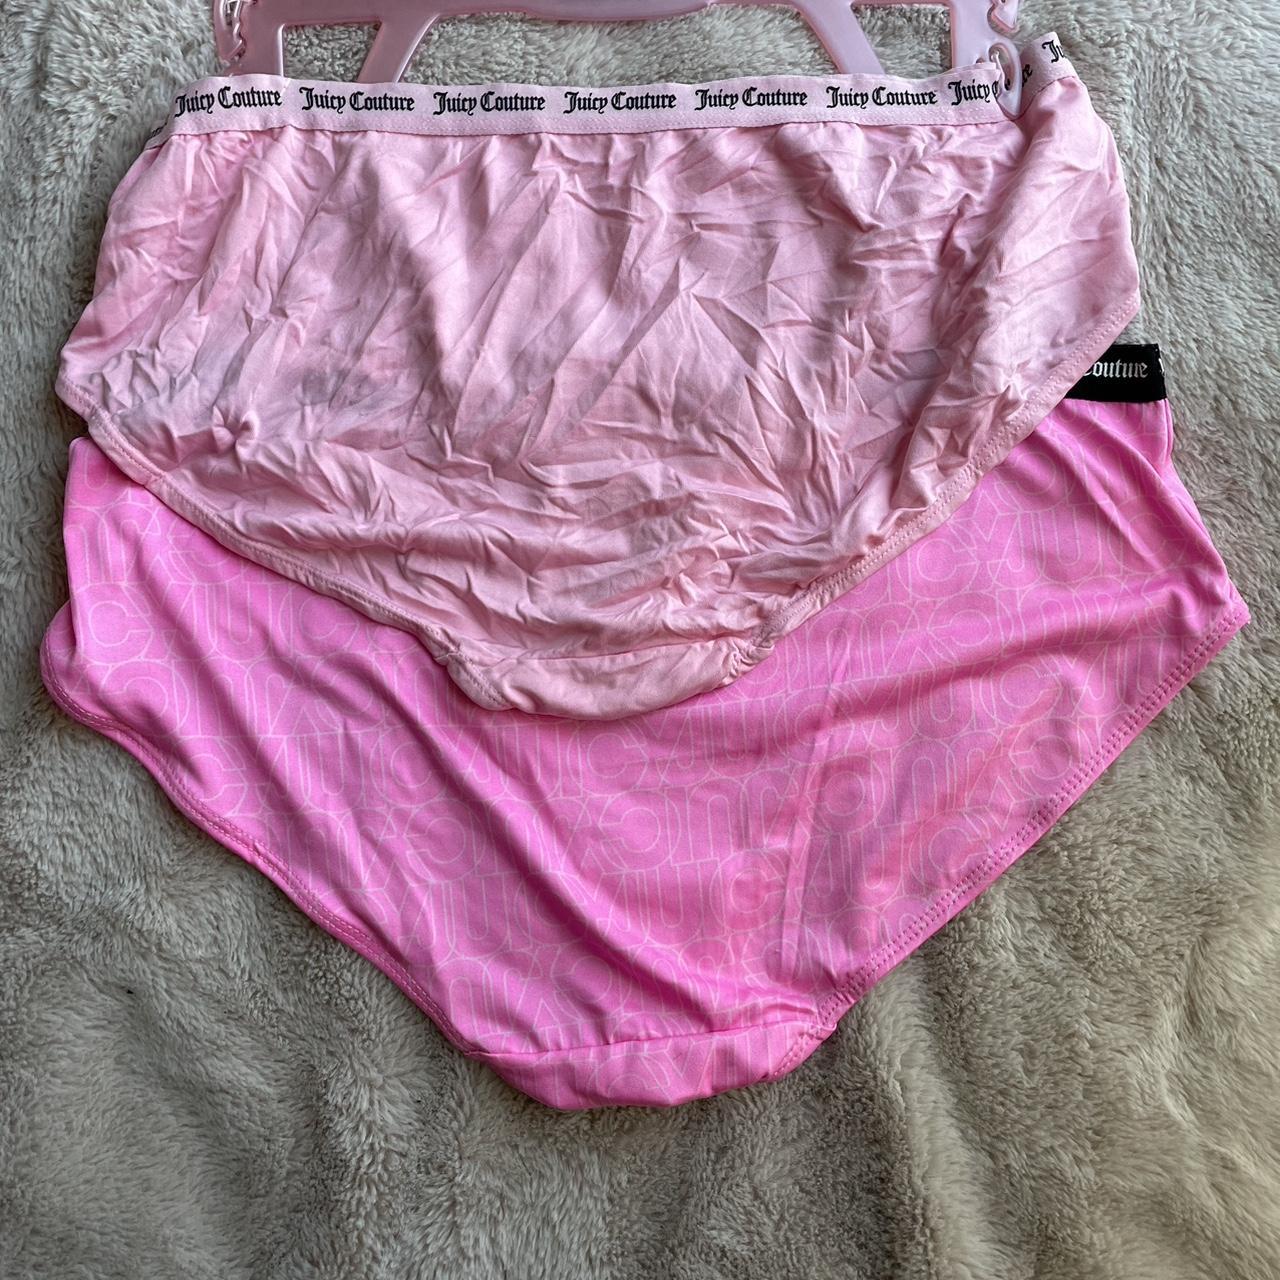 Women's Juicy Couture Underwear, New & Used